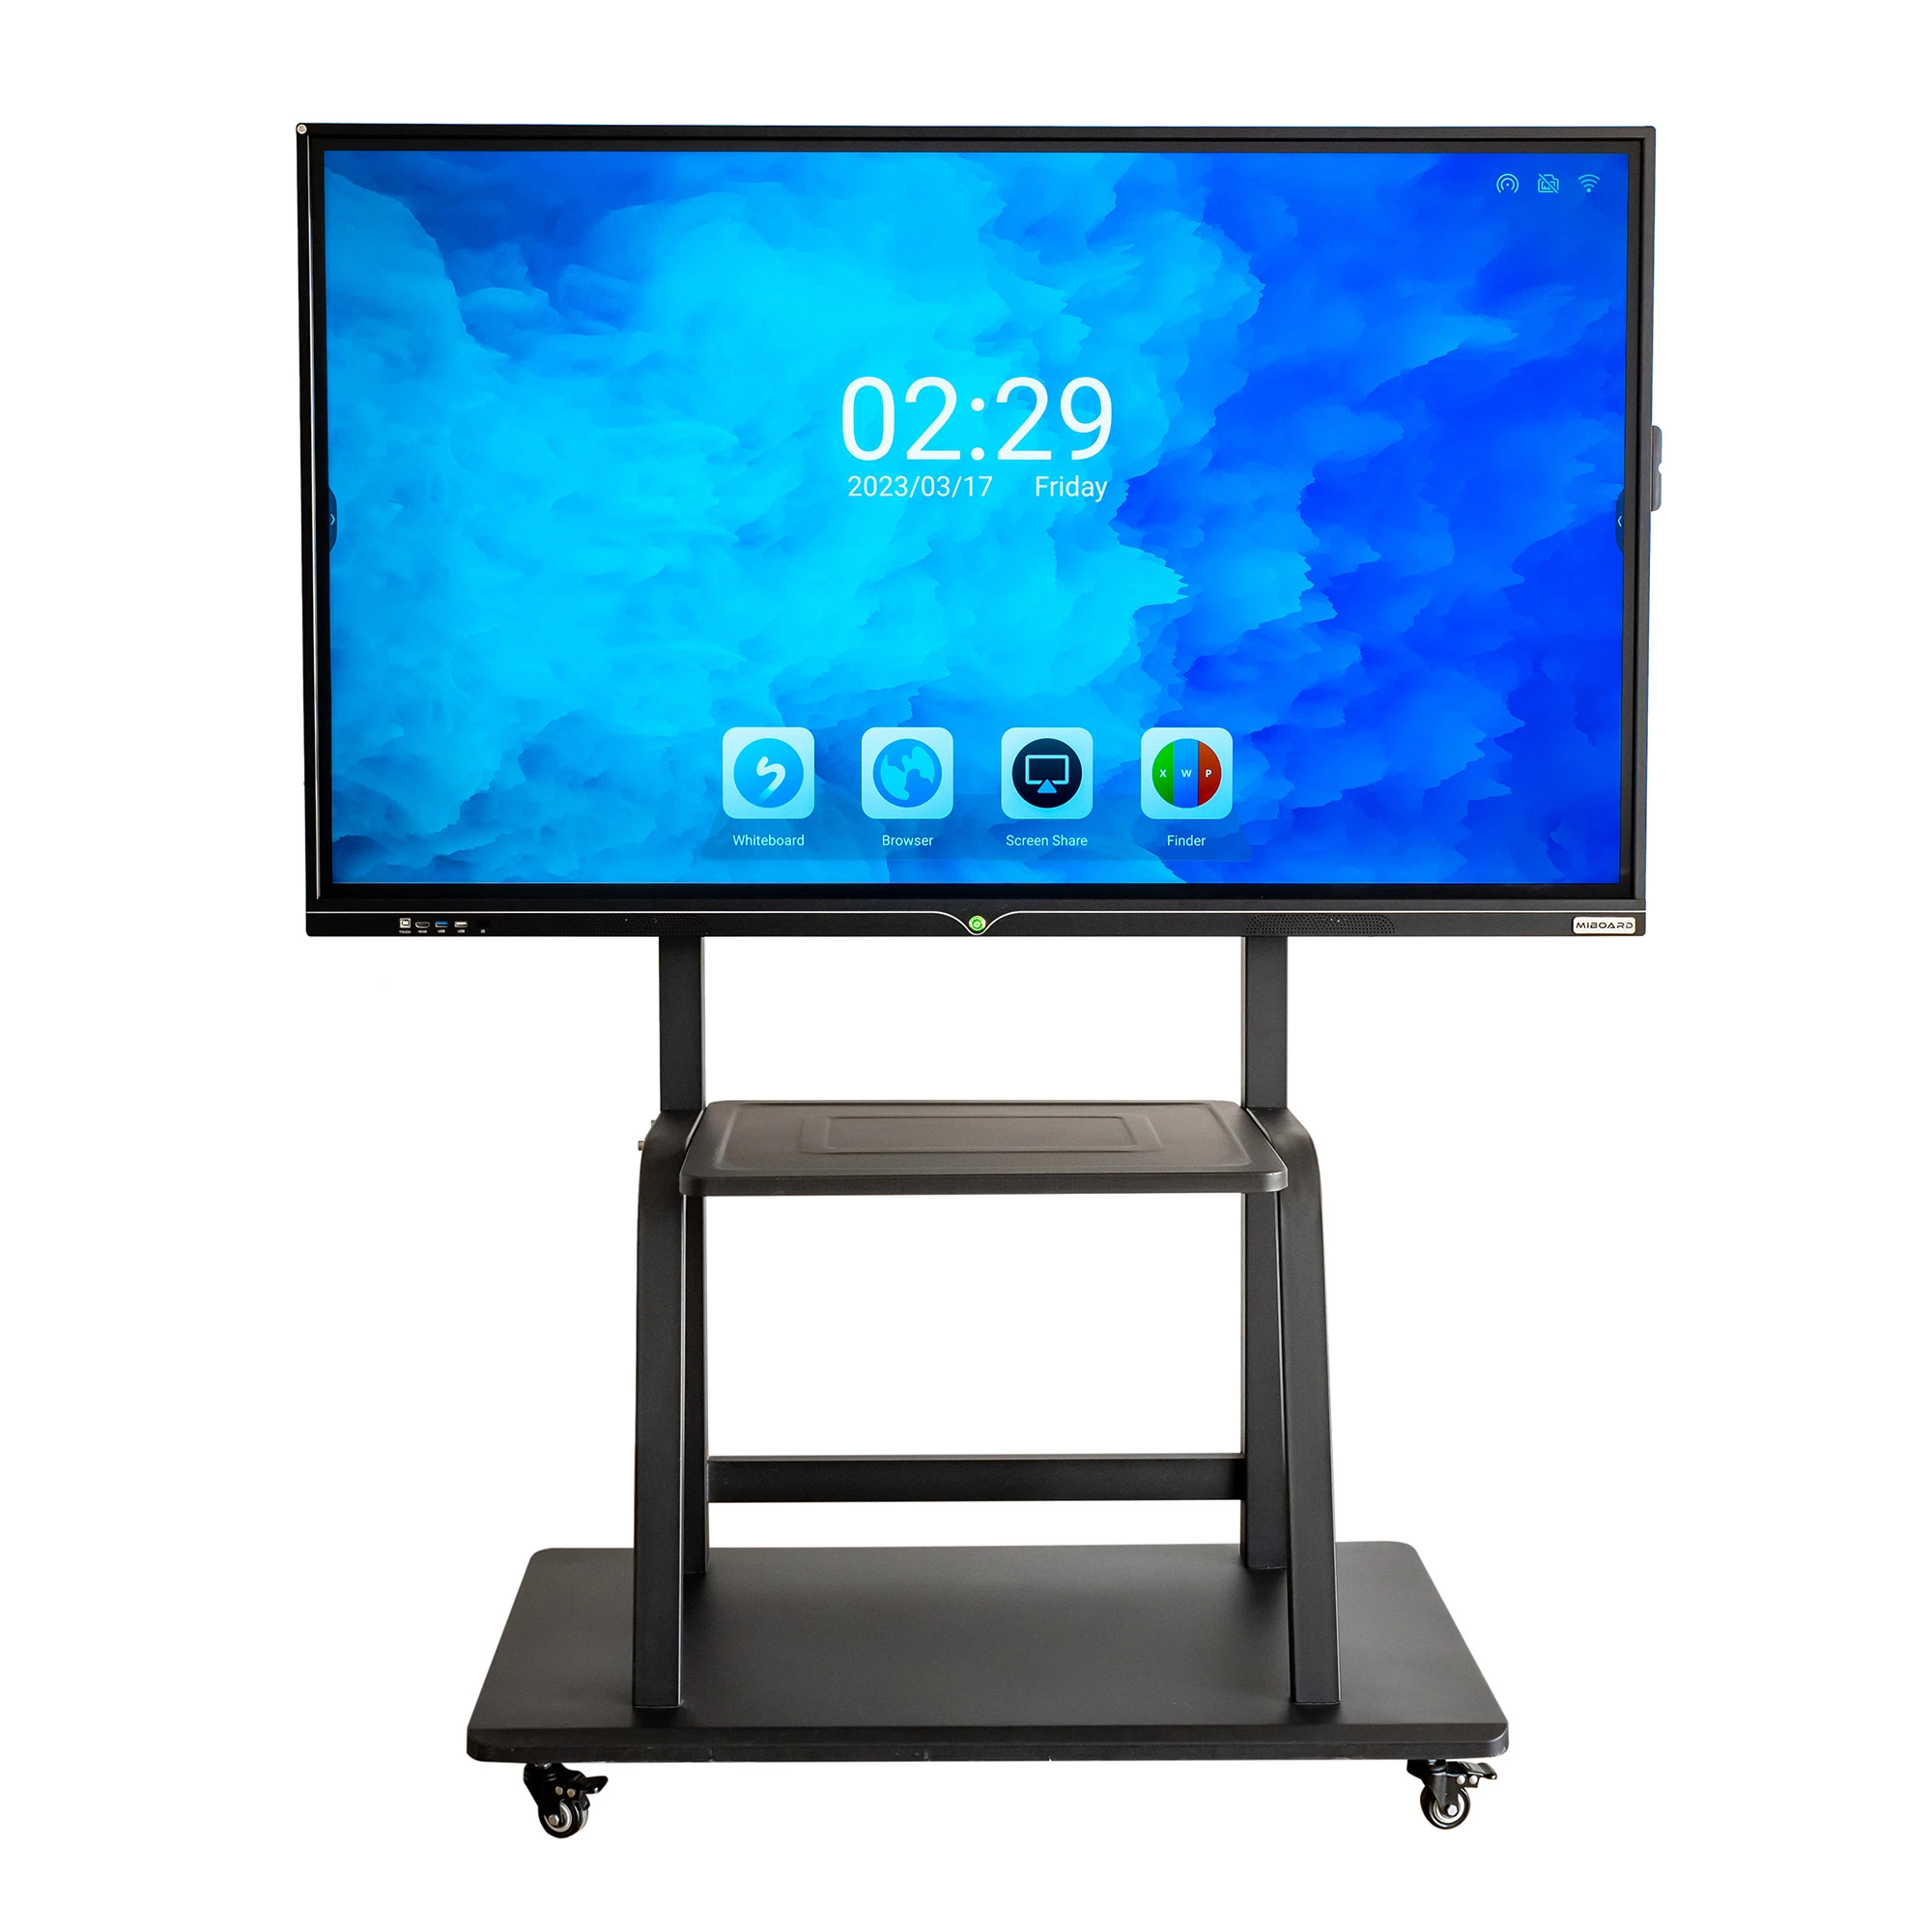 4K Multi Infrared LED Touch Computer Touch Interactive Flat Smart Board Miboard Kiosk Conference Meeting Whiteboard Display LCD Screen Ifp 65" 86'', 110'' Panel